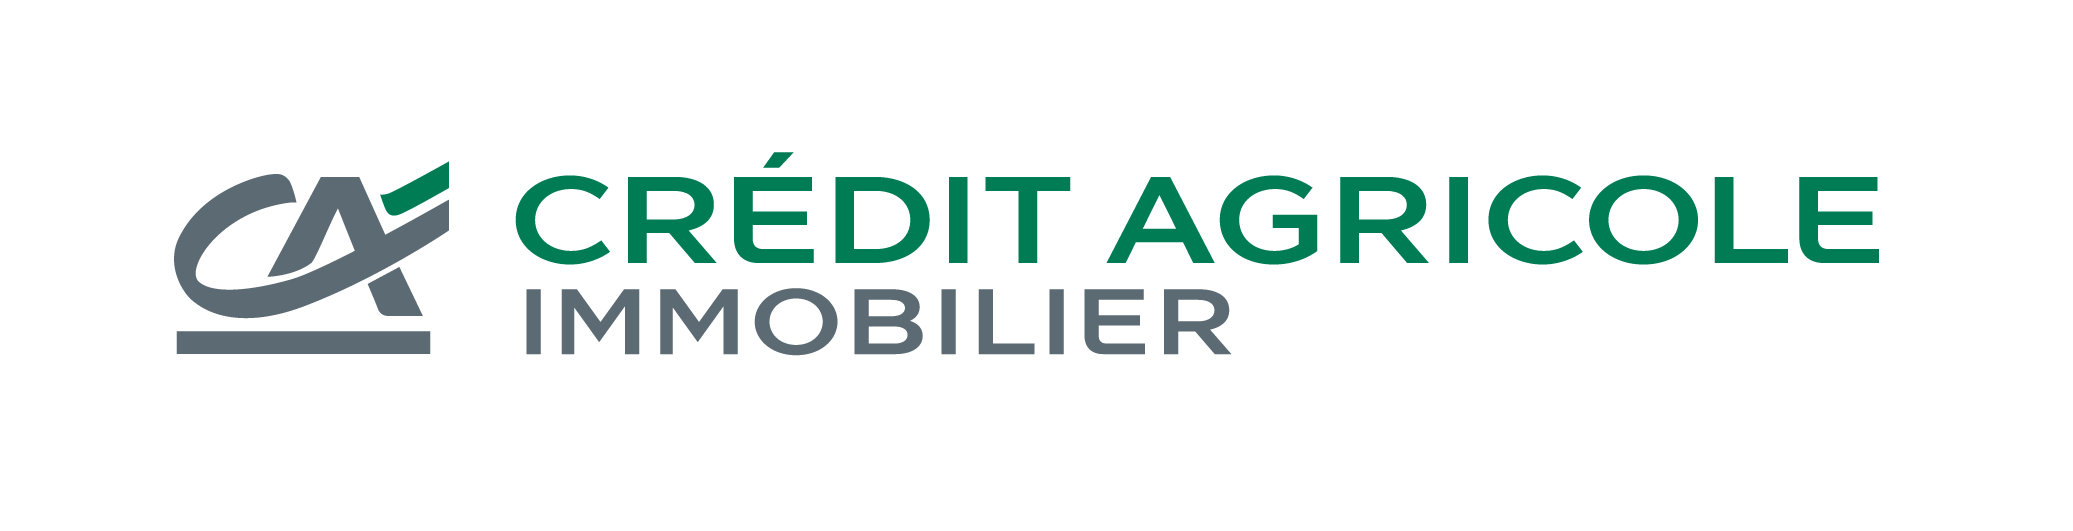 Immobilier neuf Credit Agricole Immobilier 